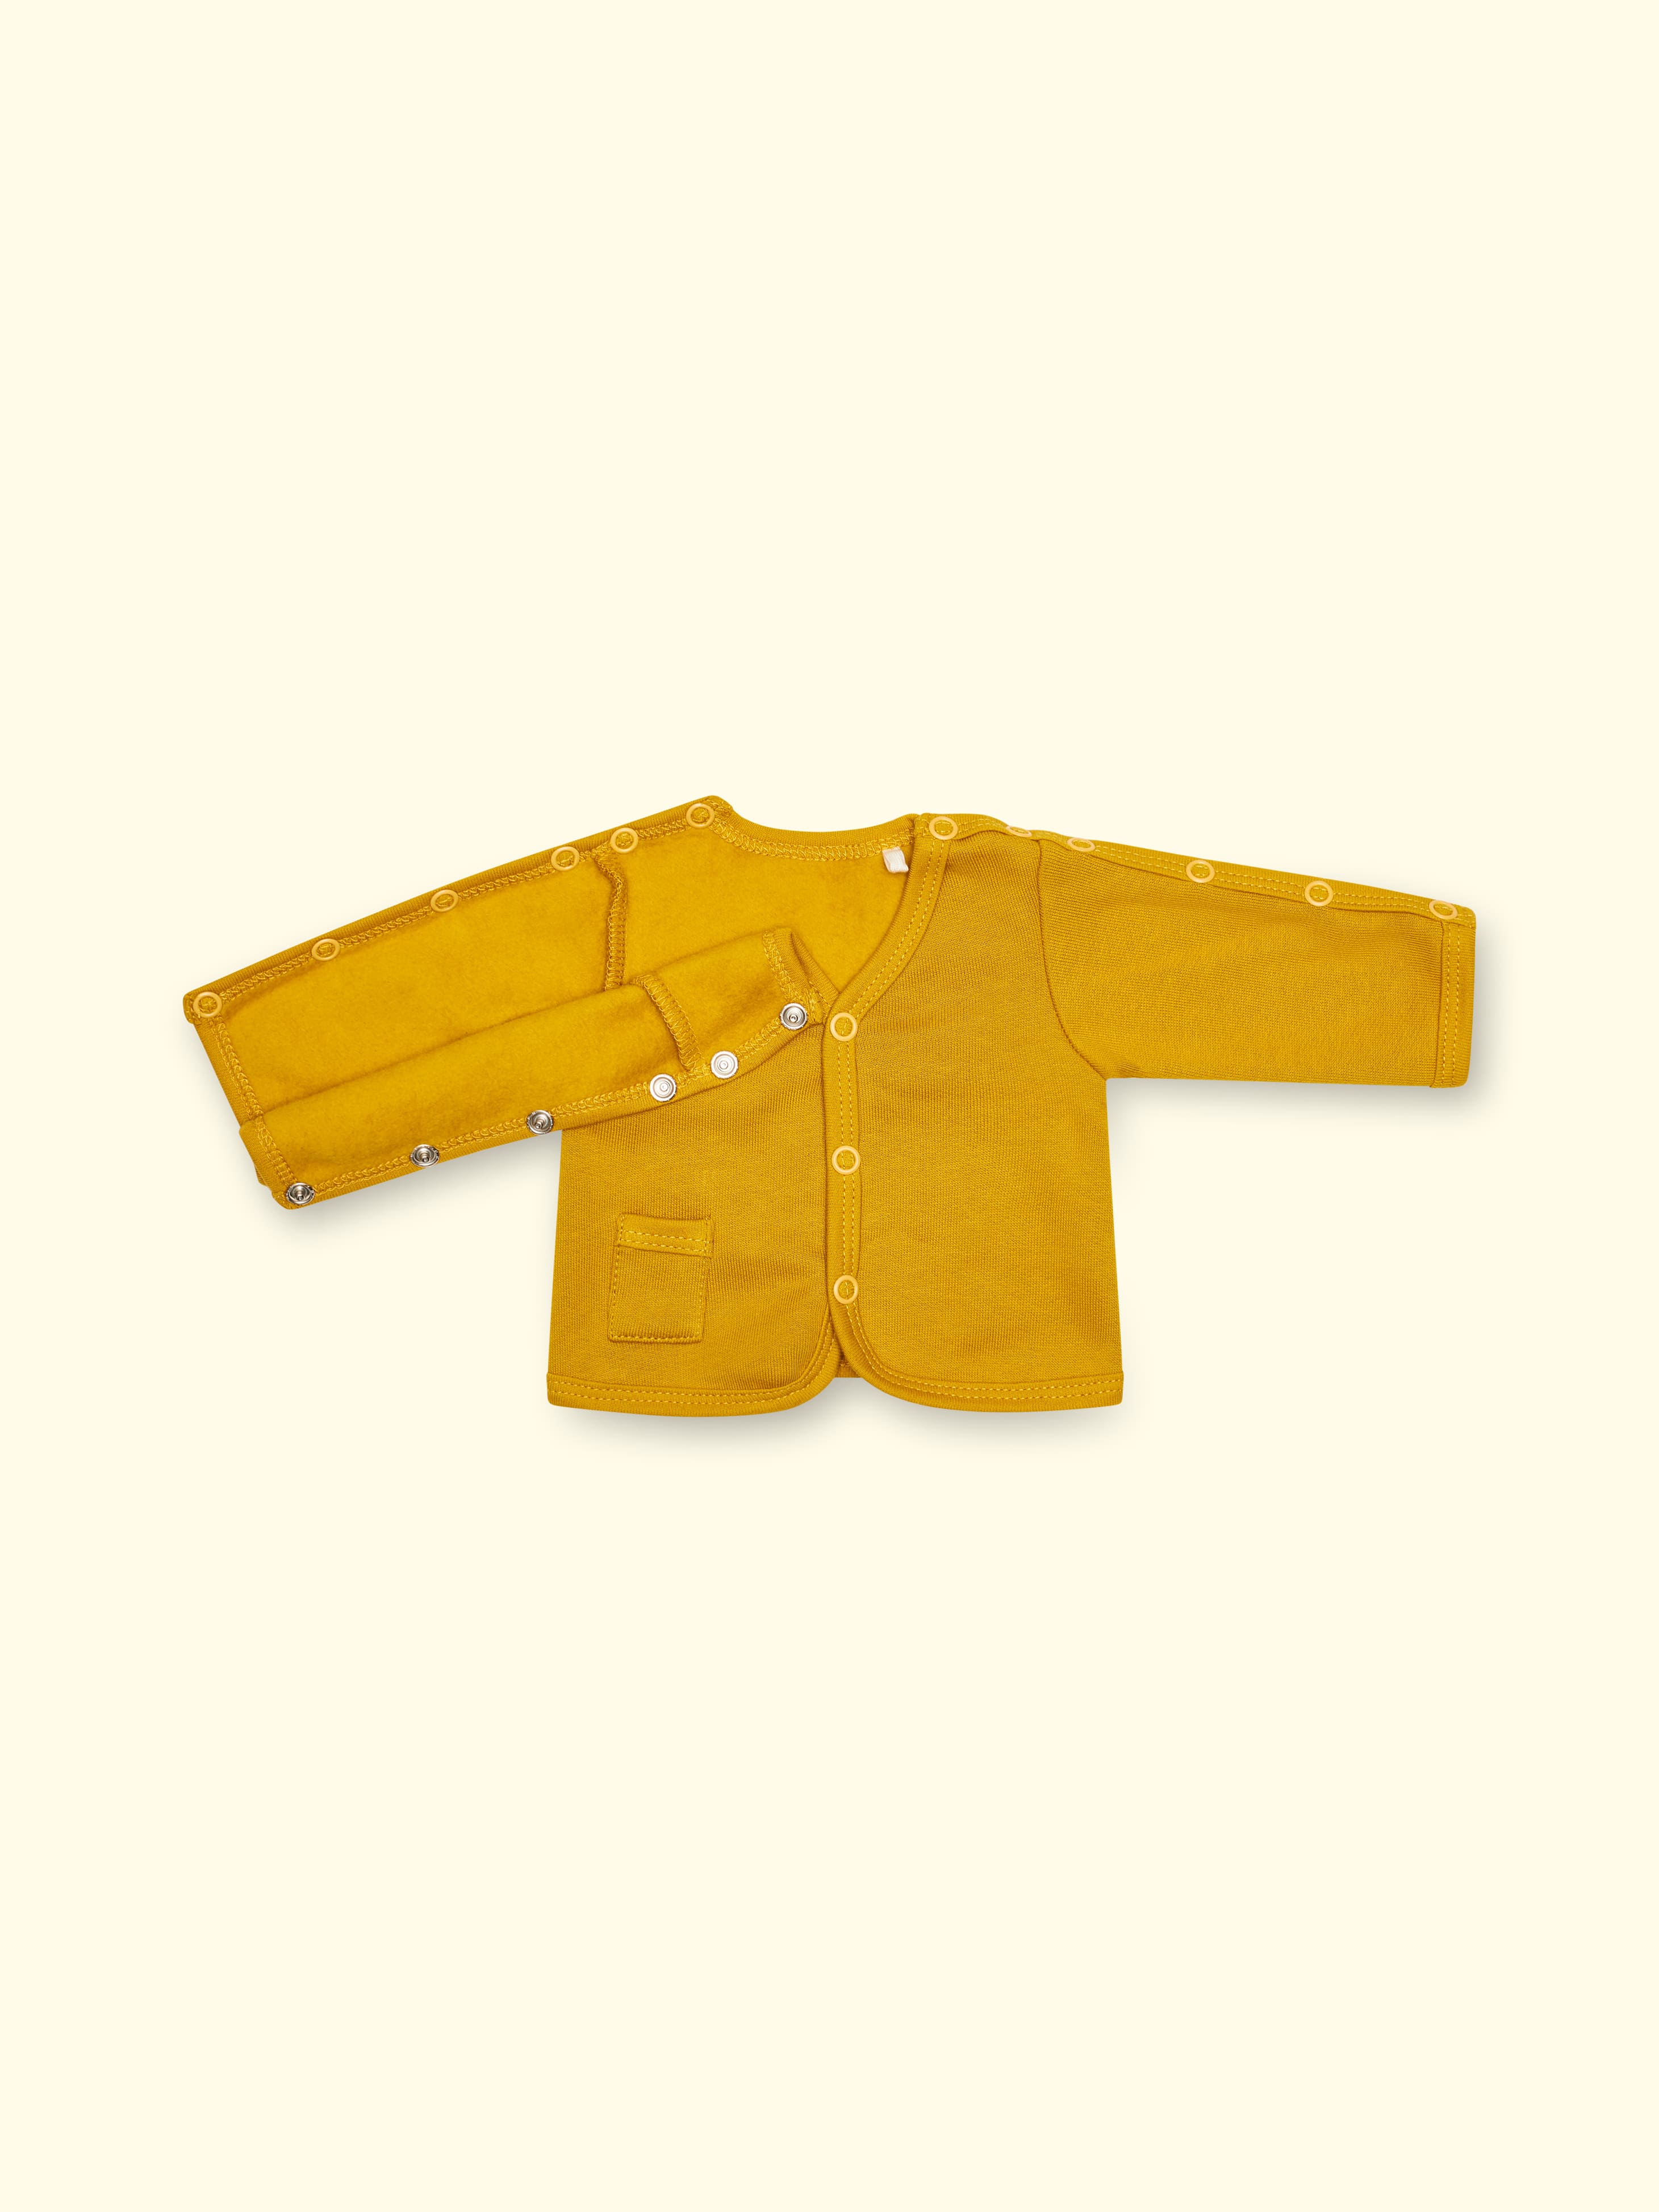 Adaptive sweat jacket, also for premature babies